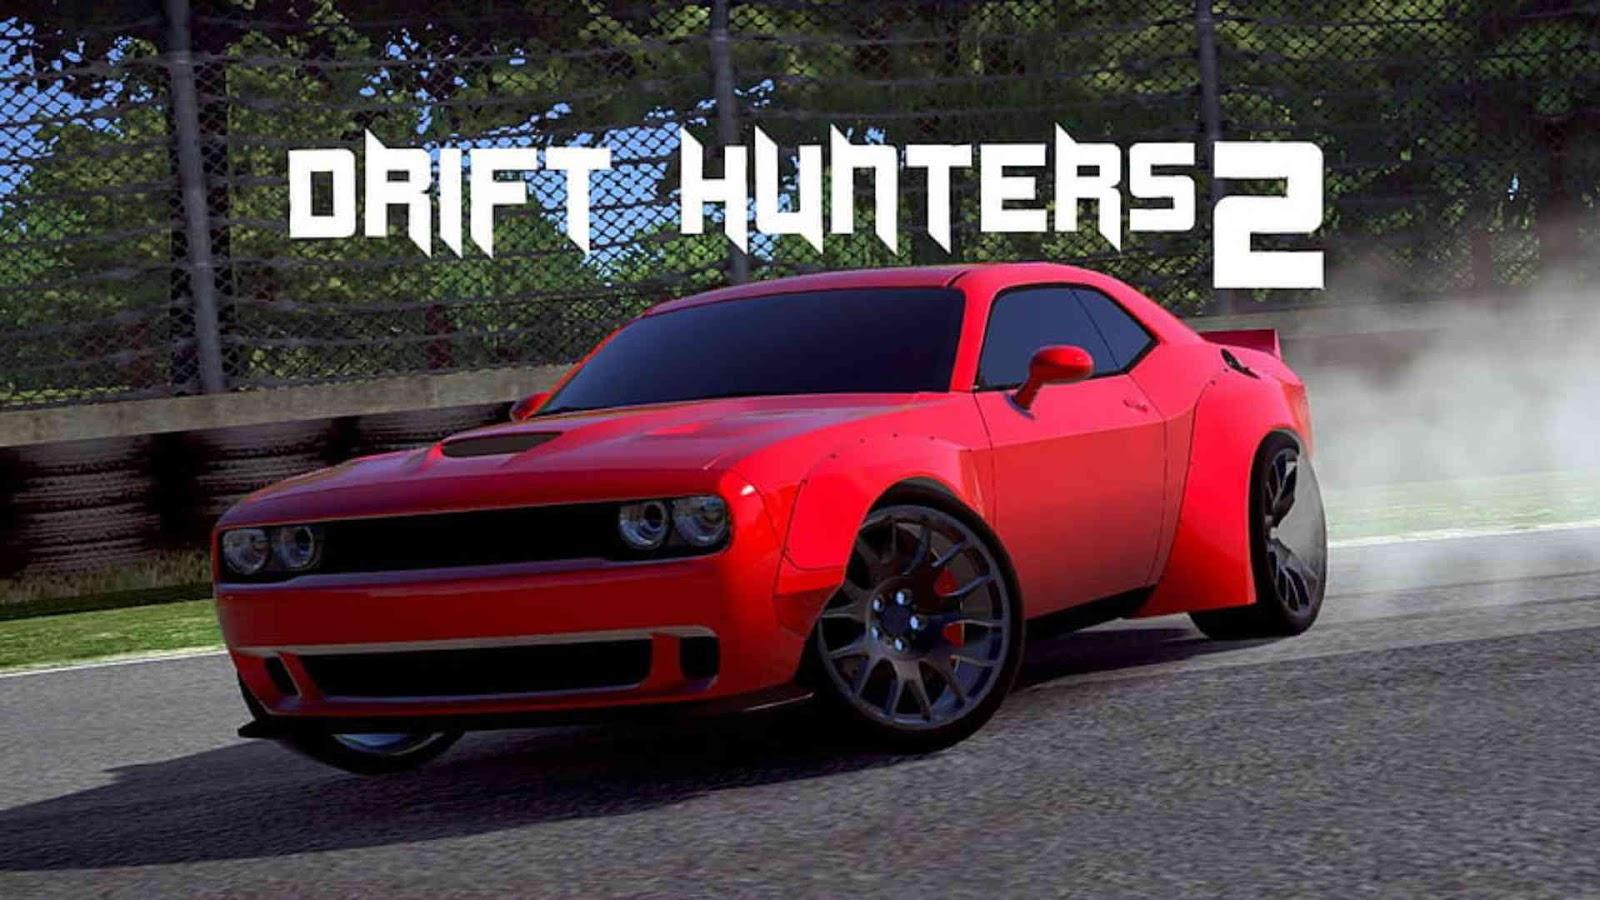 Drift hunters, Among Us, Bitlife, and more unblocked games